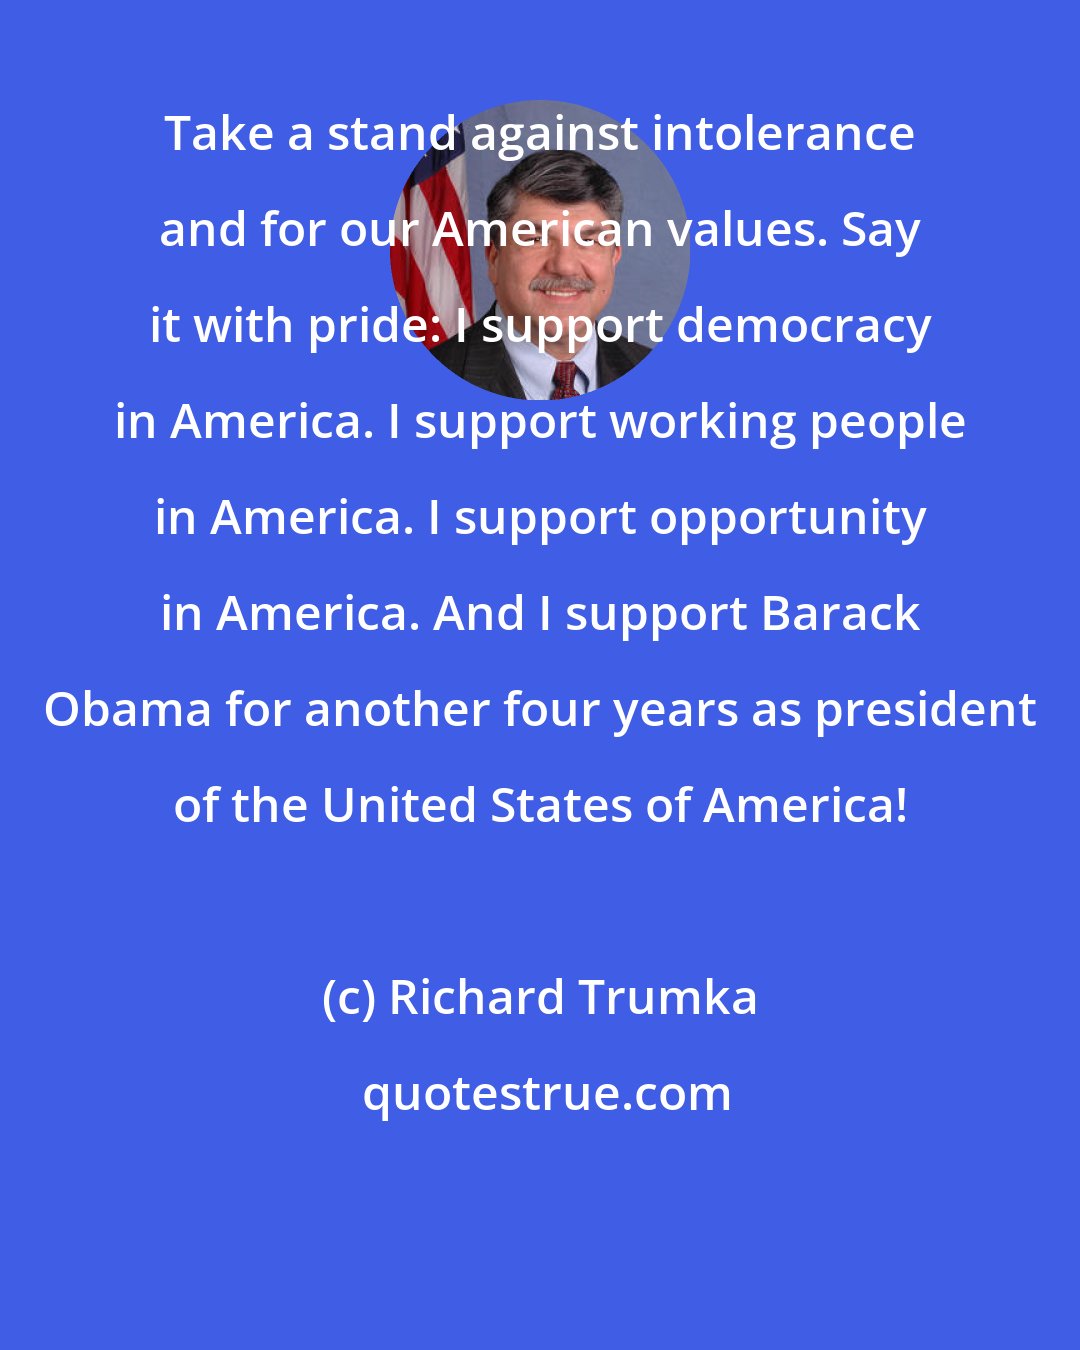 Richard Trumka: Take a stand against intolerance and for our American values. Say it with pride: I support democracy in America. I support working people in America. I support opportunity in America. And I support Barack Obama for another four years as president of the United States of America!